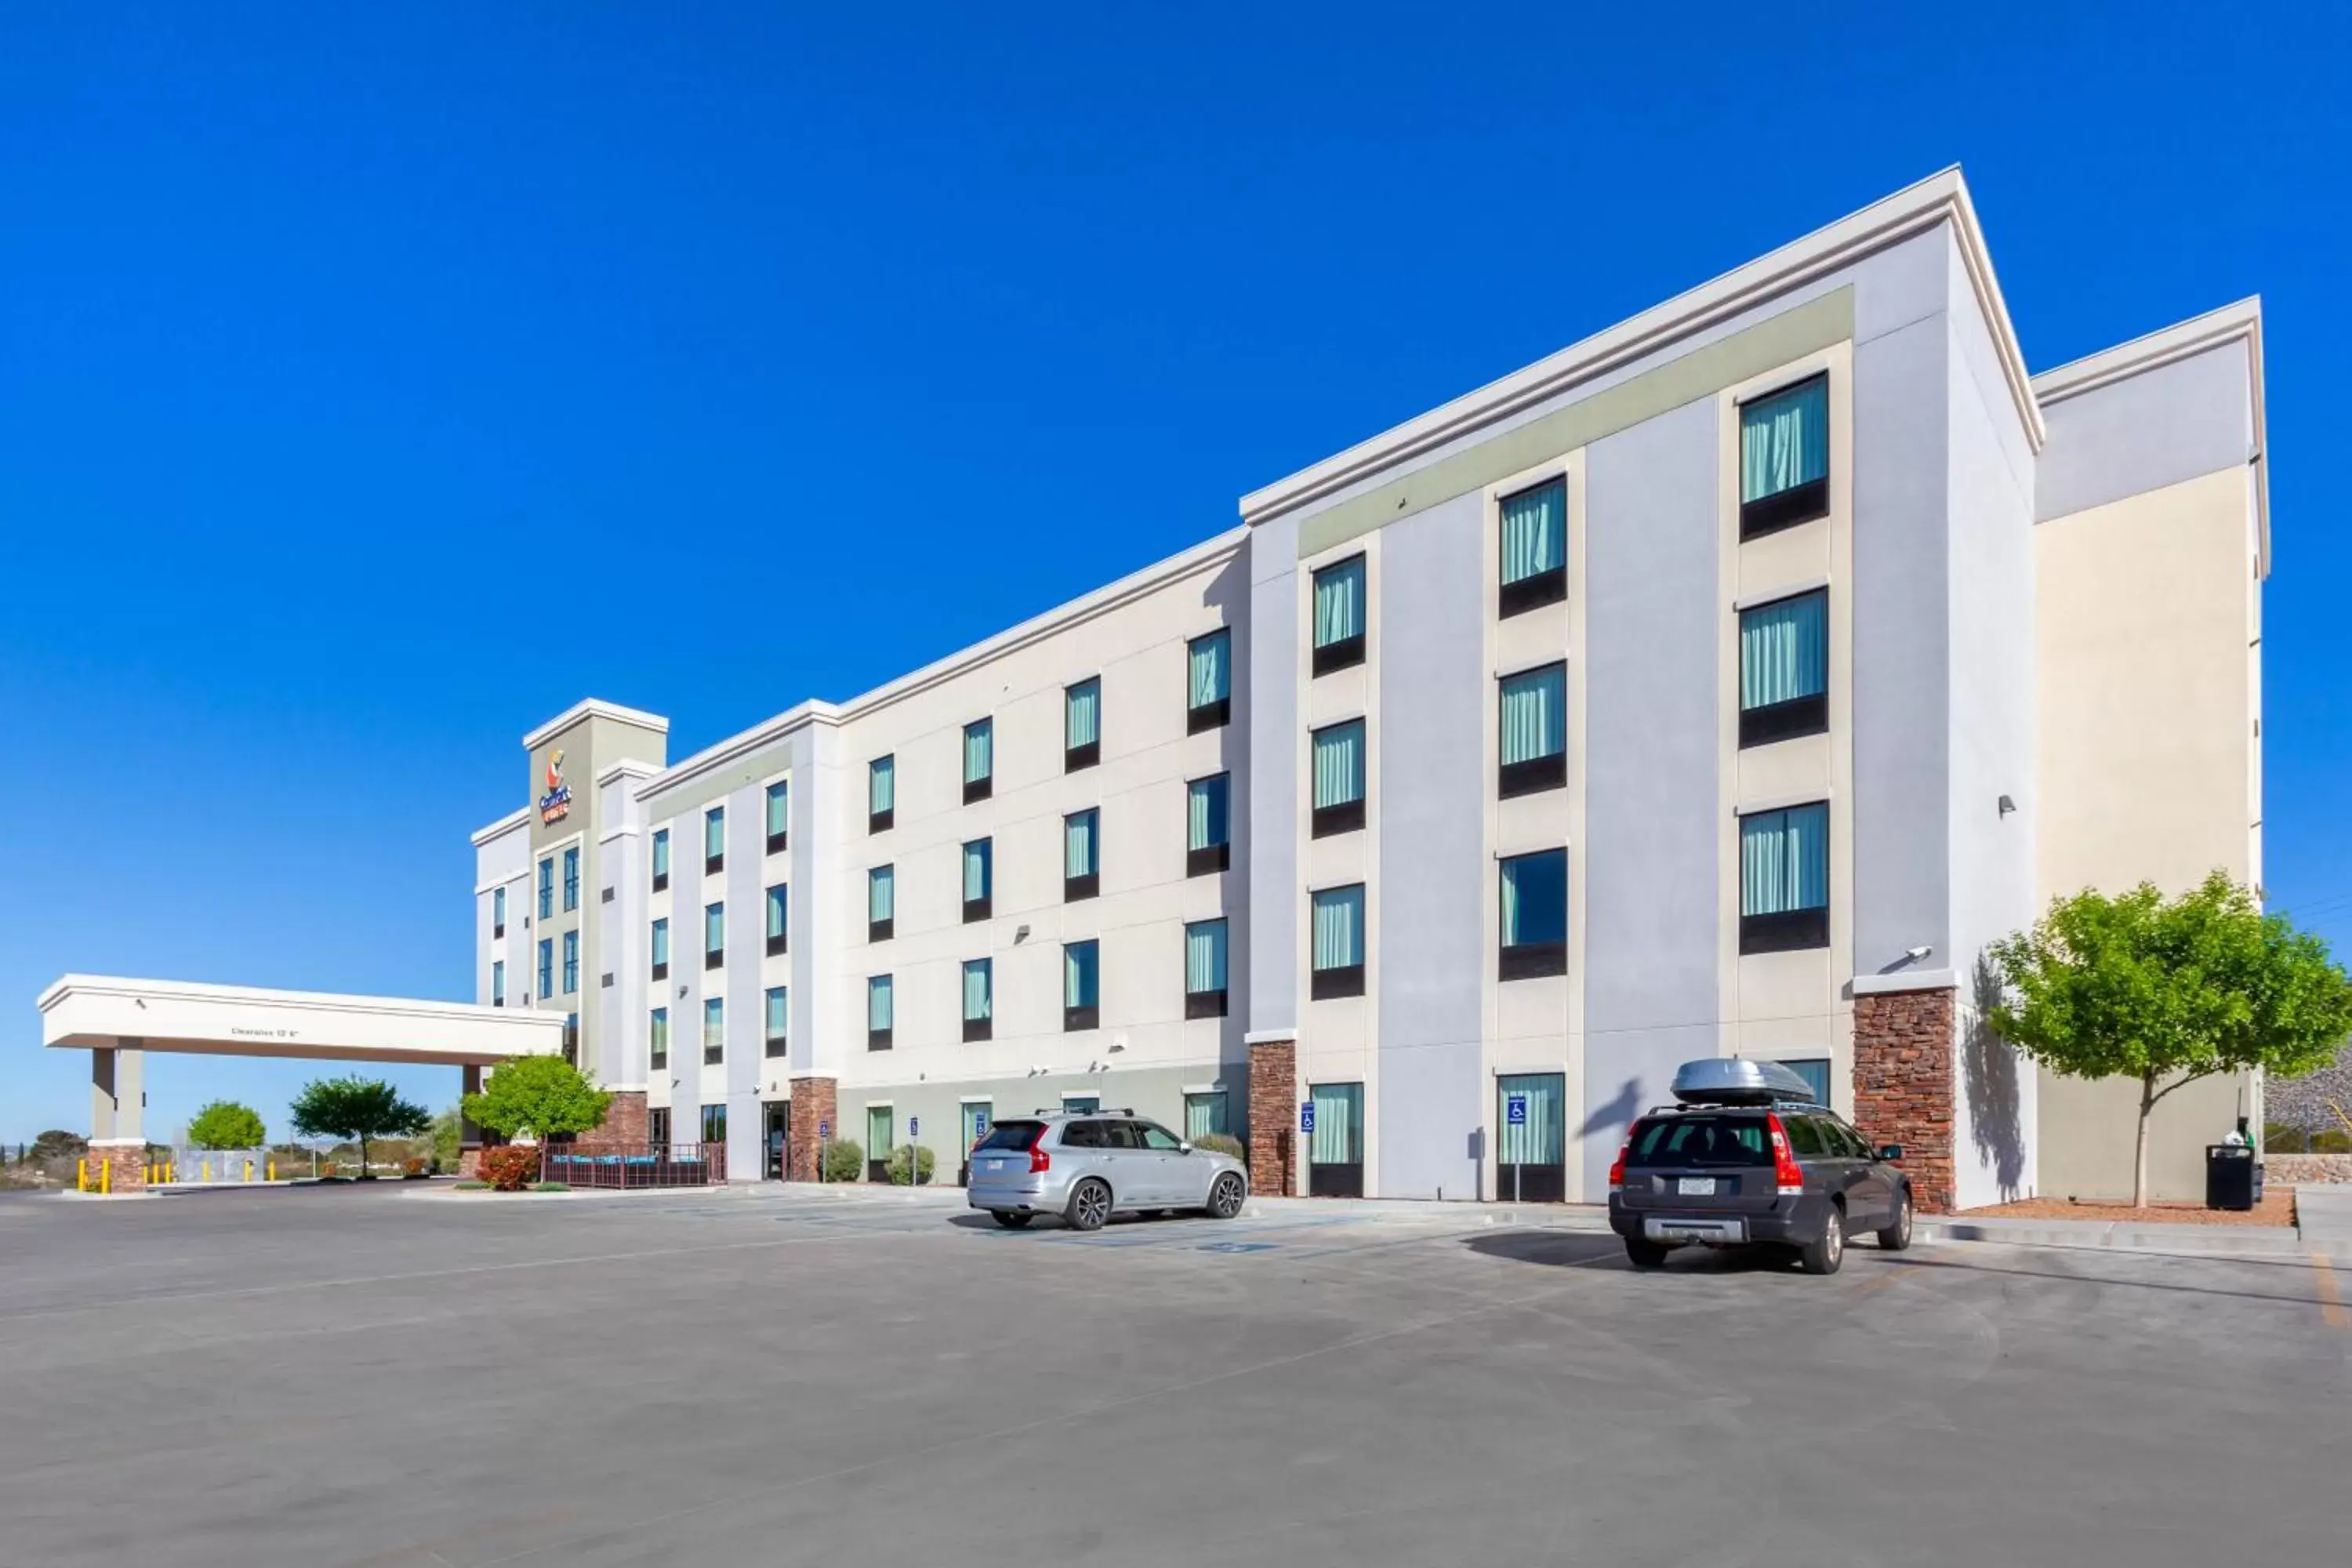 Bird's eye view, Property Building in Comfort Suites of Las Cruces I-25 North